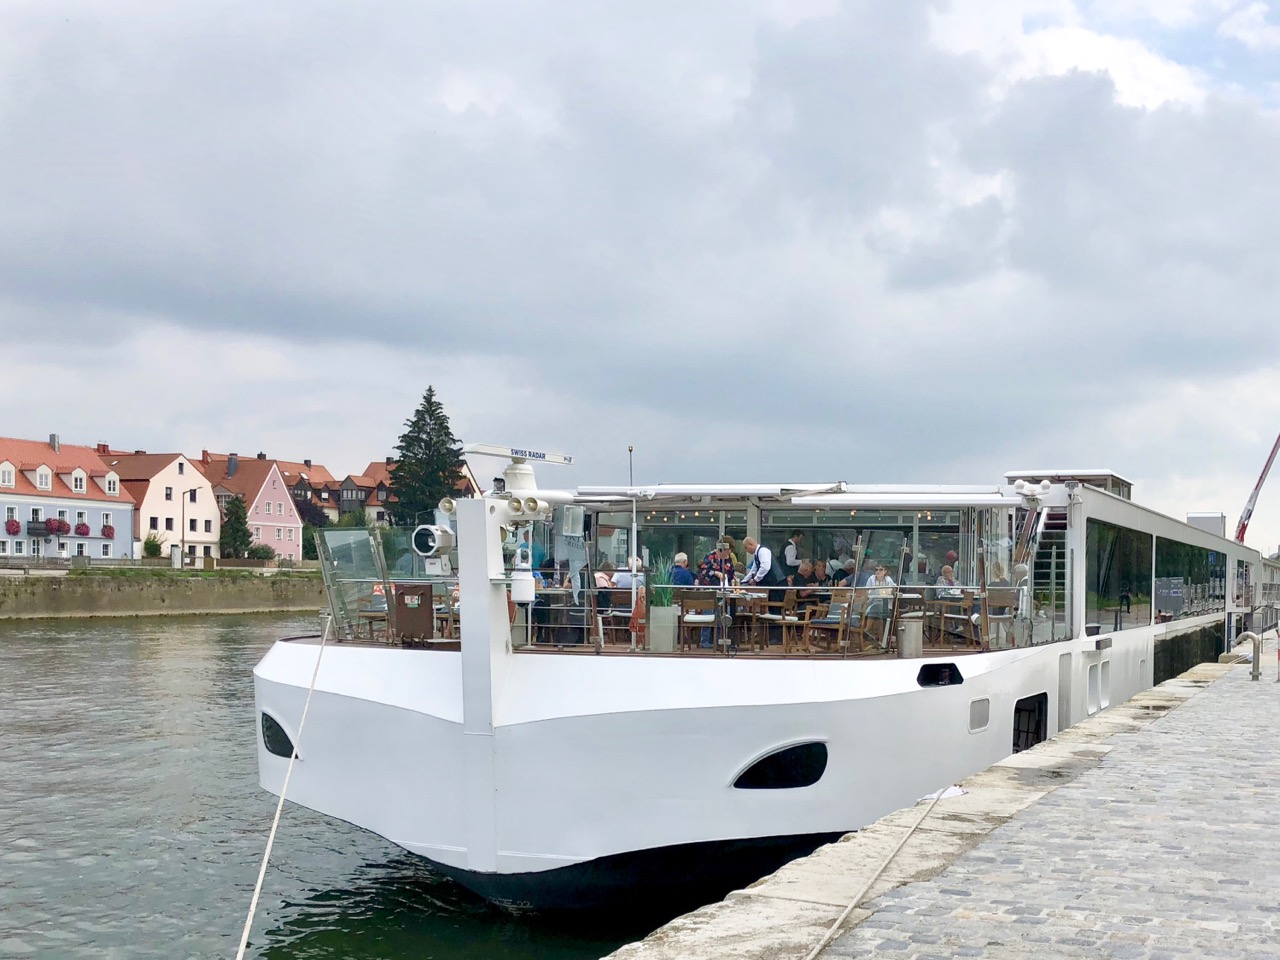 Viking River Cruise Longship Overview